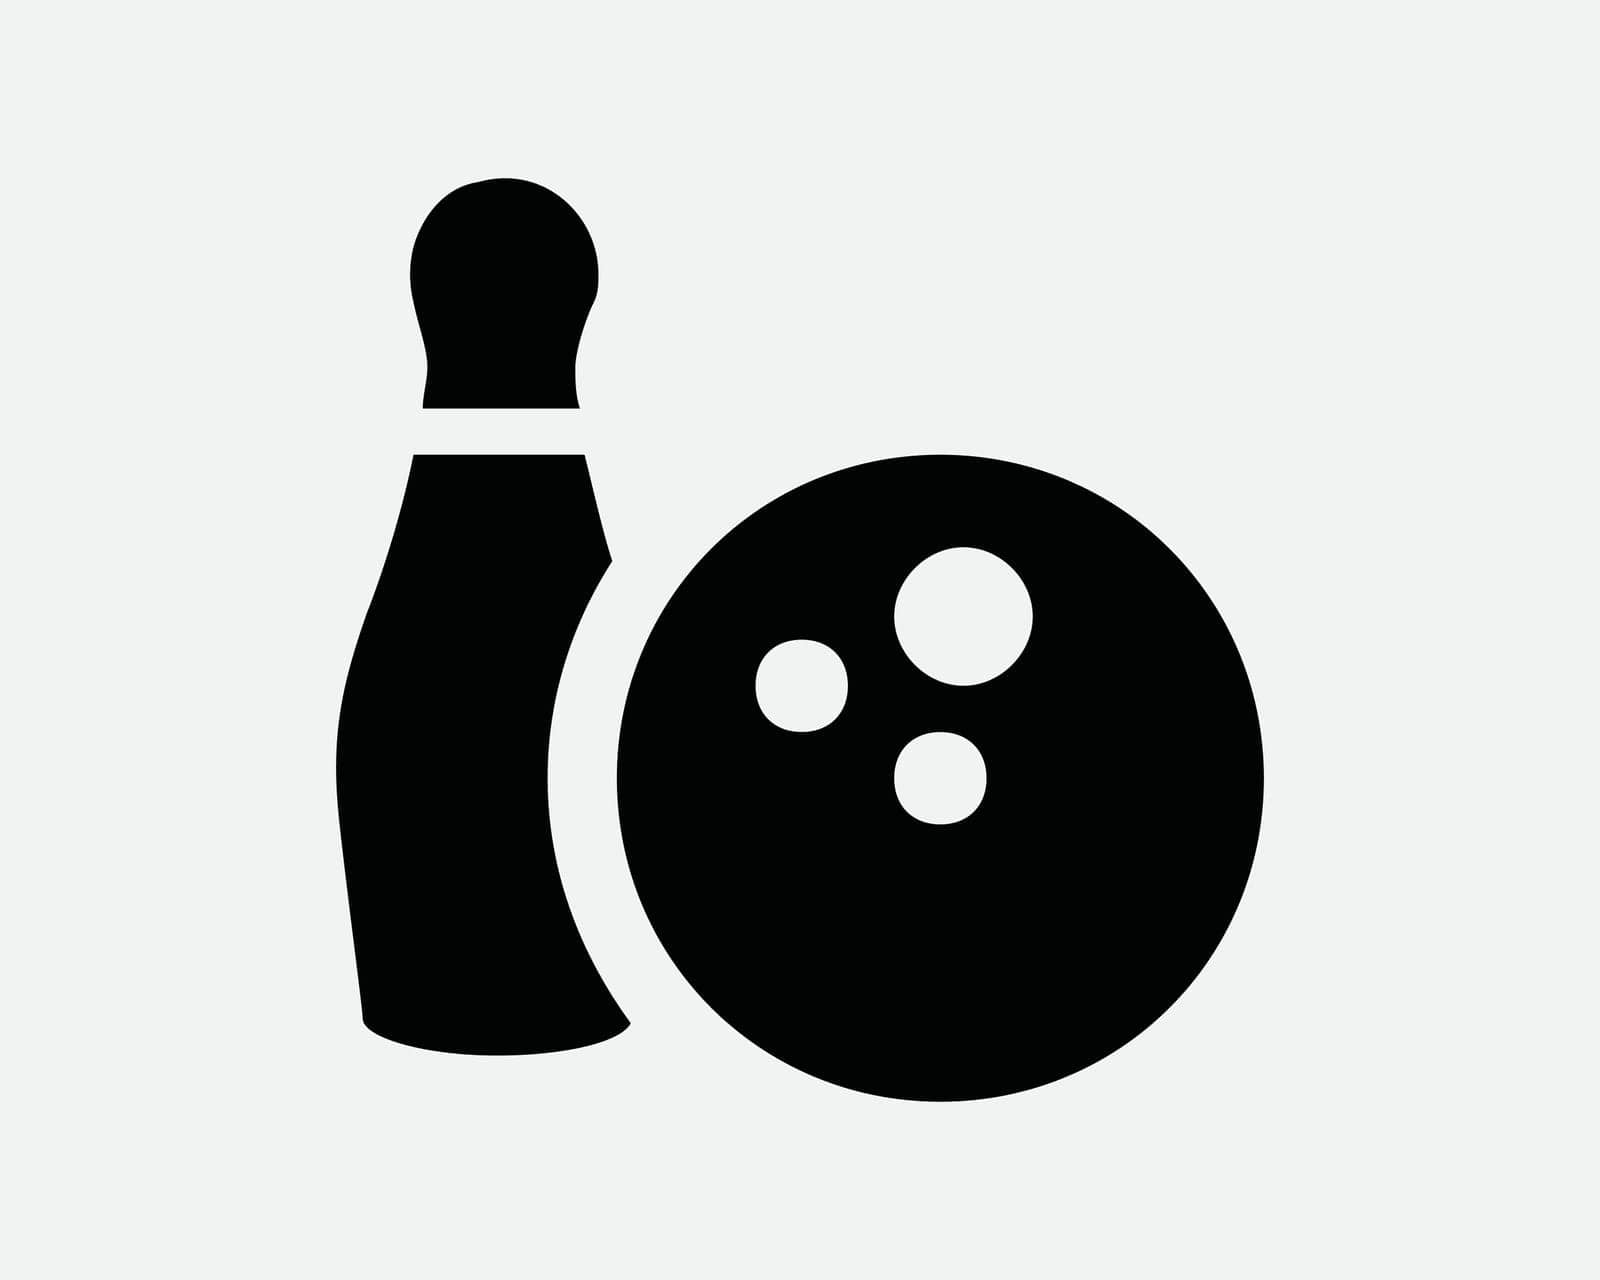 Bowling Ball and Pin Icon Sport Competition Game Strike Hobby Recreation Play Black White Sign Symbol Illustration Artwork Graphic Clipart EPS Vector